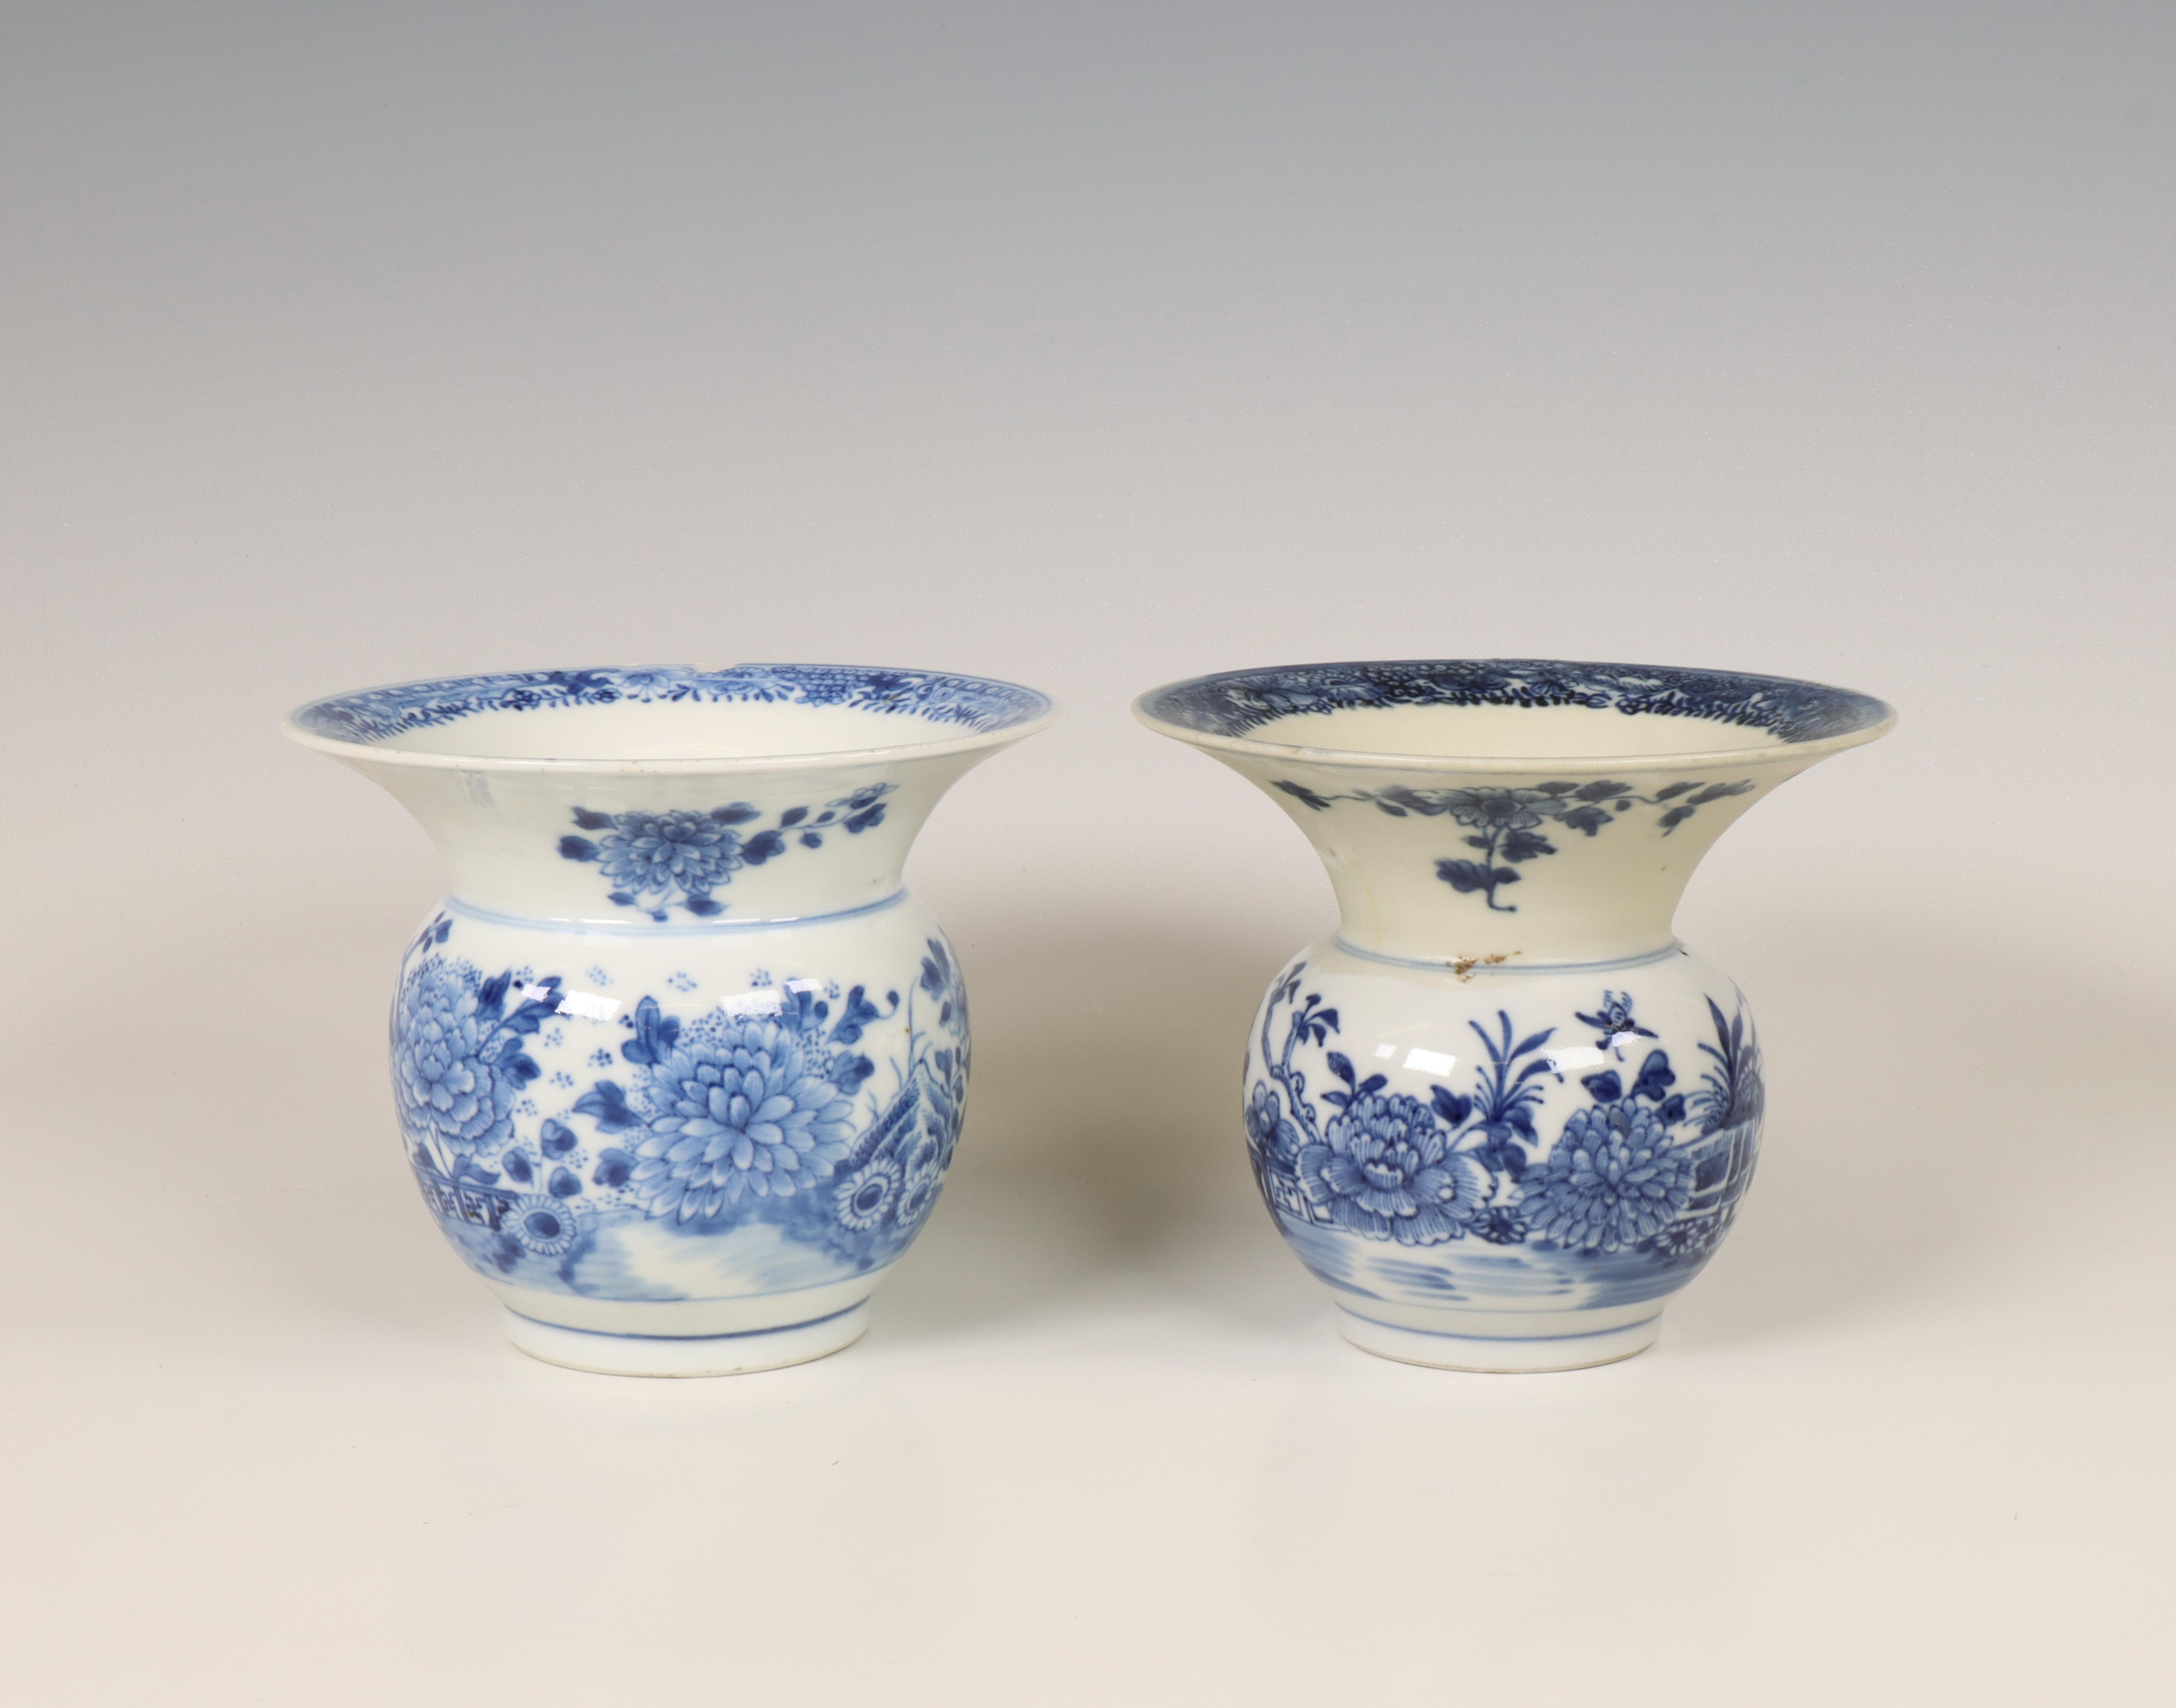 China, two blue and white porcelain spittoons, Qianlong period (1736-1795),